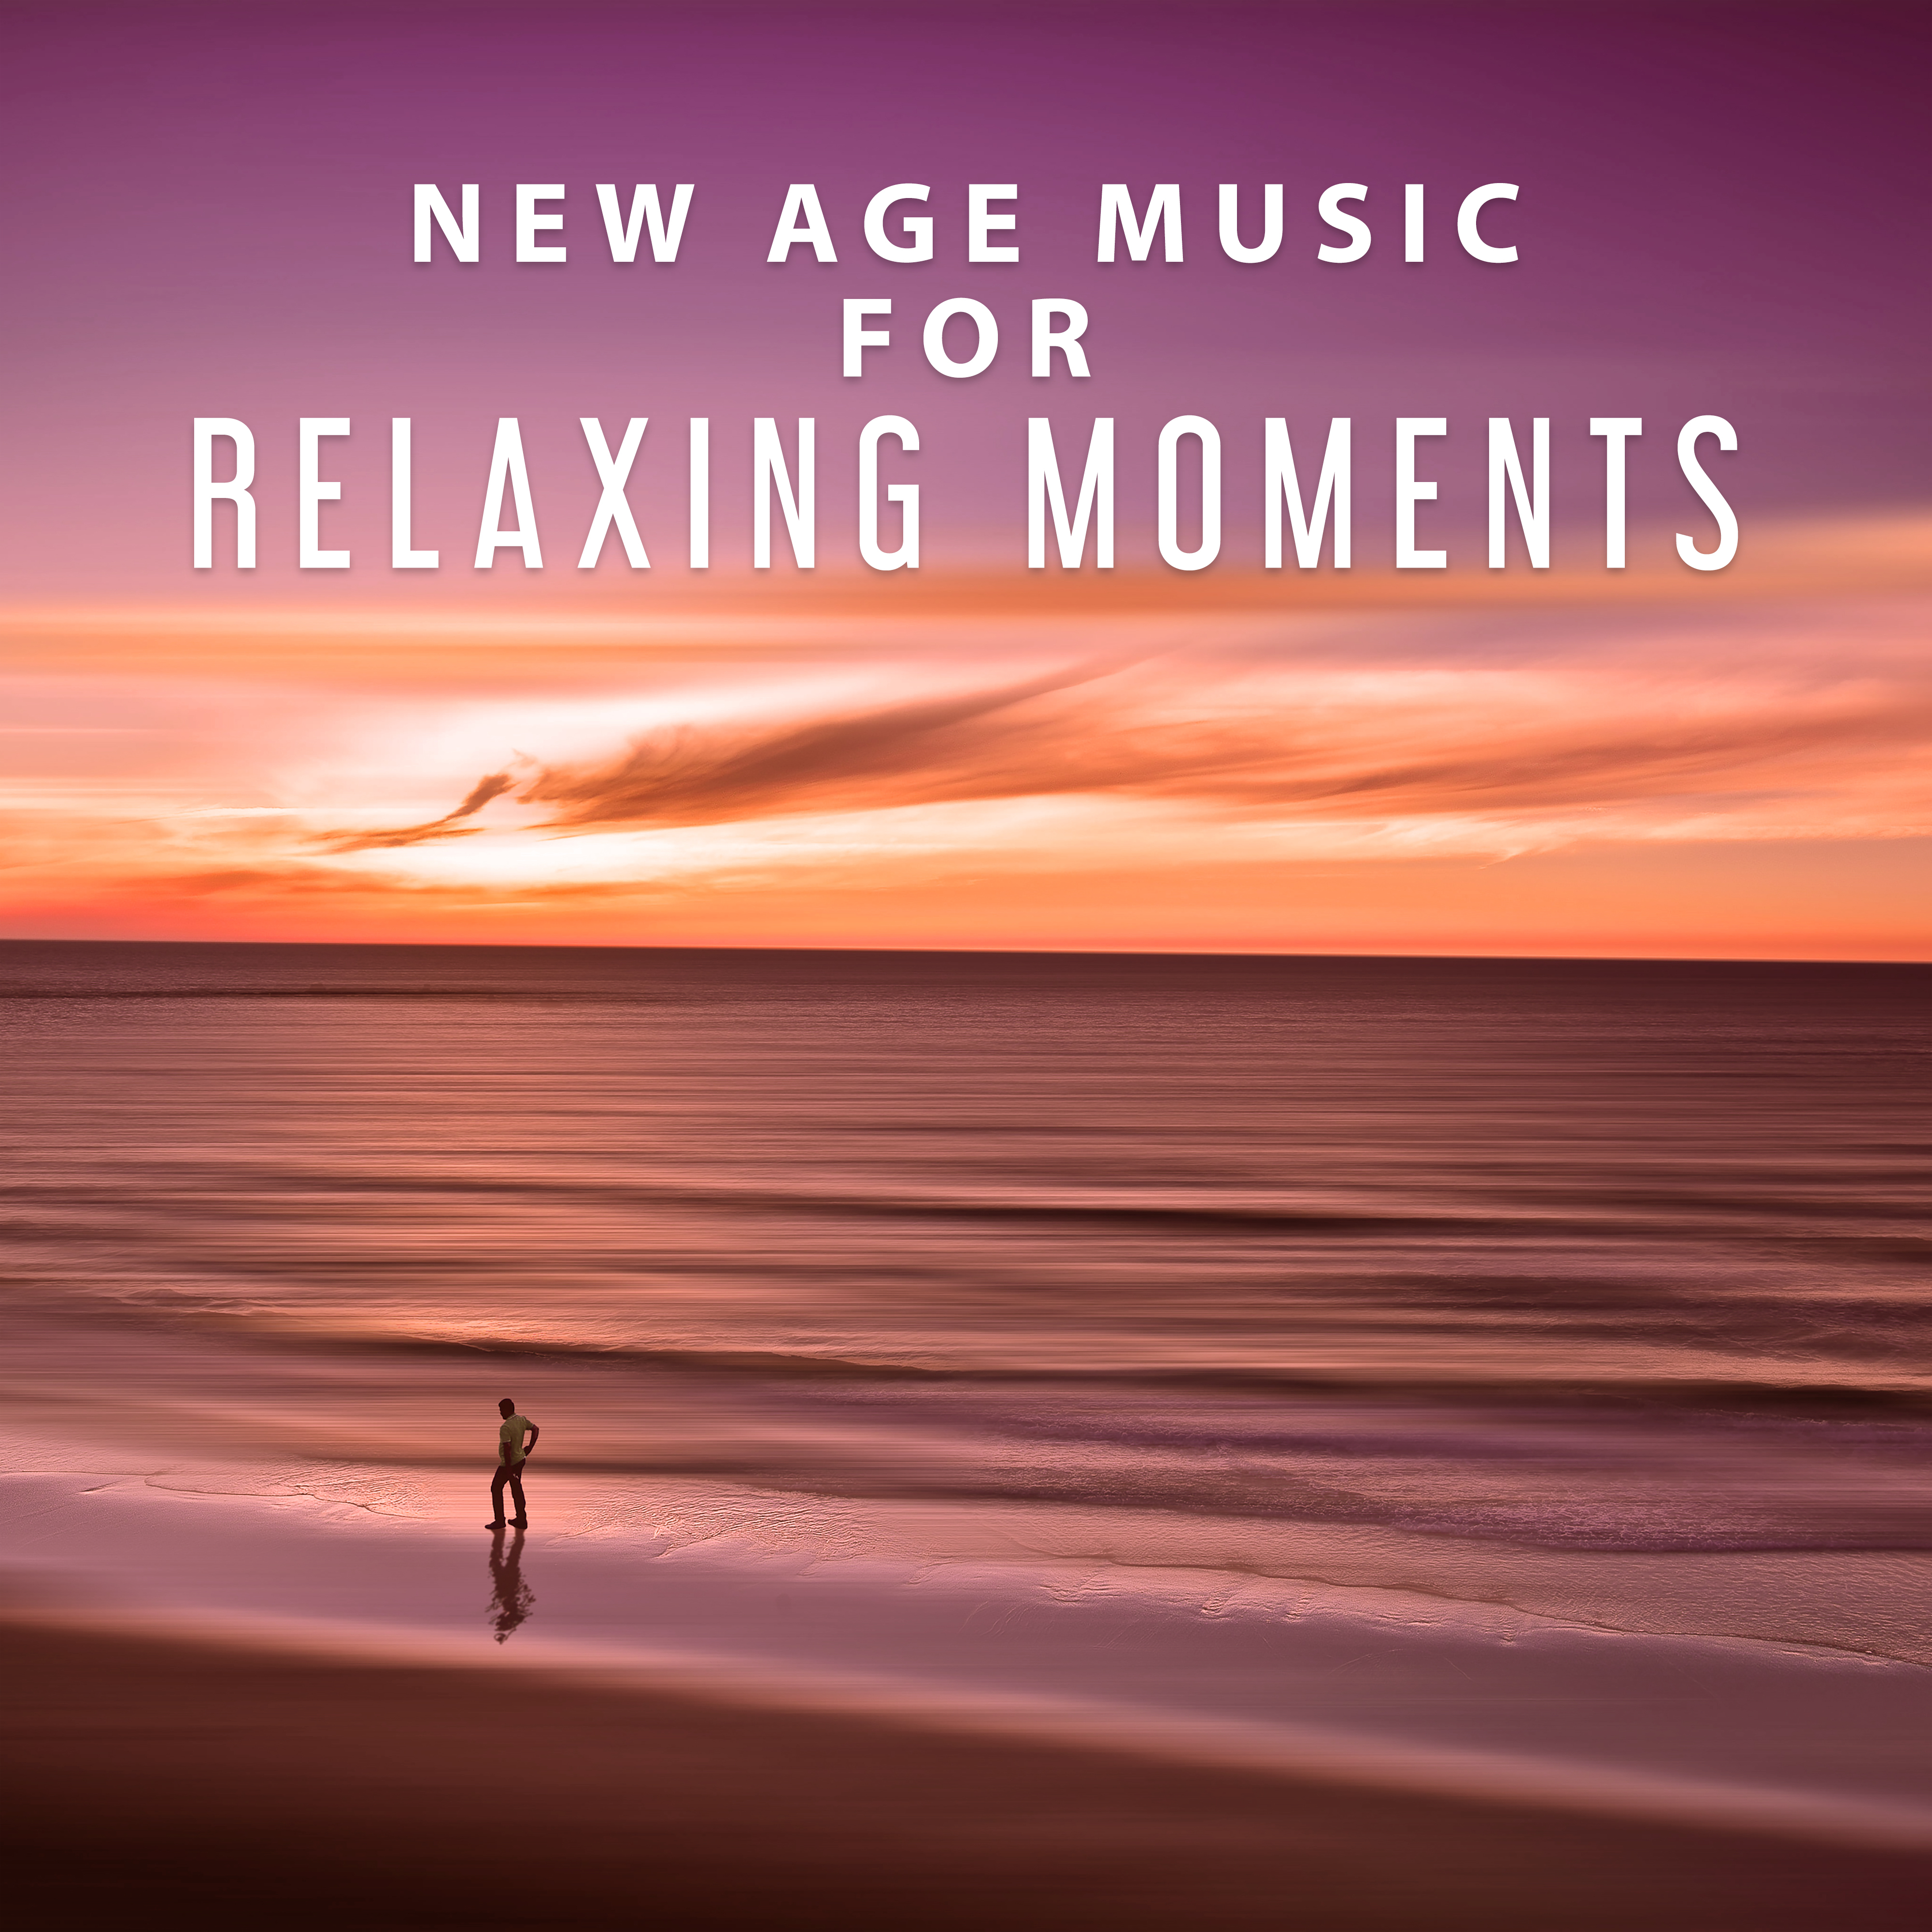 New Age Music for Relaxing Moments – Rest & Relax, Soothing New Age Sounds, Mind Free, Spirit Calmness, Inner Silence